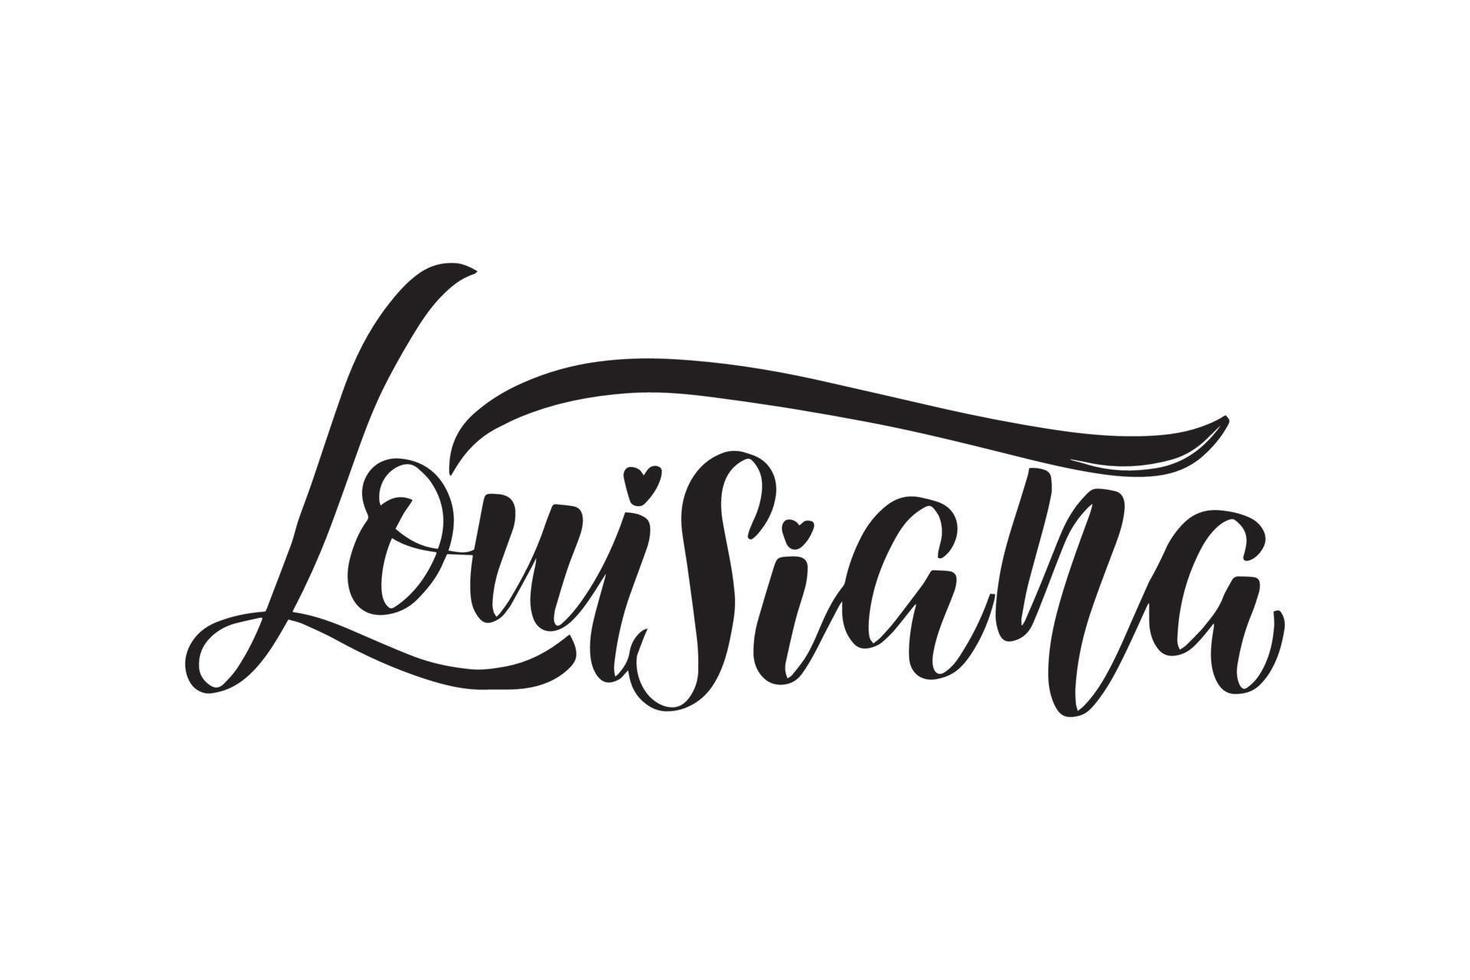 Inspirational handwritten brush lettering Louisiana. Vector calligraphy illustration isolated on white background. Typography for banners, badges, postcard, tshirt, prints, posters.